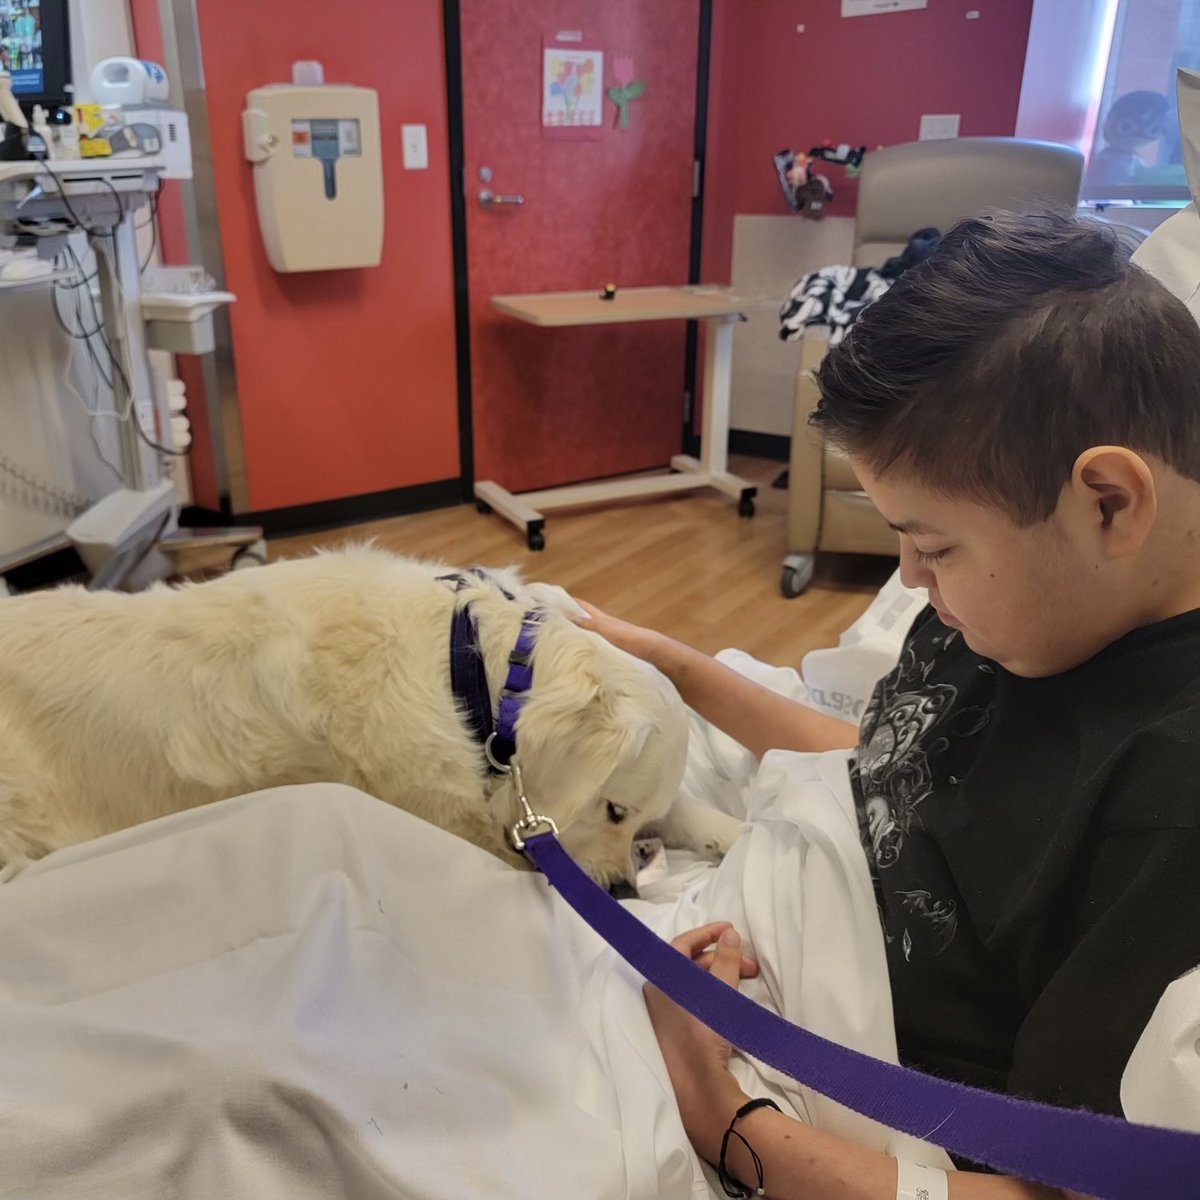 Jayden and his mom say that therapy dogs have been an essential part of their hospital experience. “We’ve been here a long time. There have been really hard days, a lot of waiting. The dogs give us the feeling of home,” says Jayden’s mom. Jayden is a recipient of a heart and…